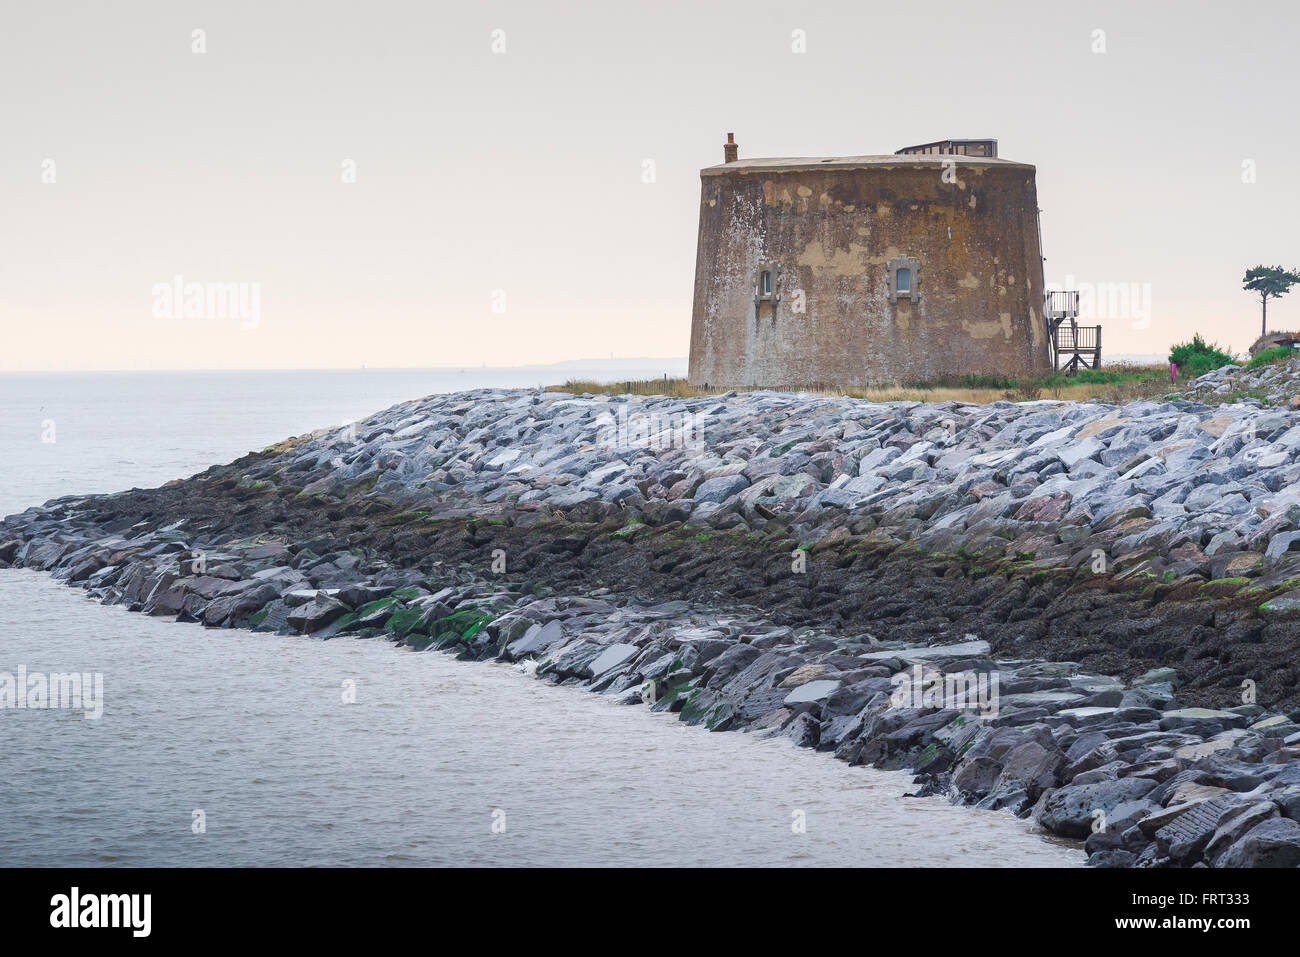 Martello tower Suffolk, view of a Grade II listed Martello Tower at Bawdsey on the Suffolk coast, now converted to residential property,UK Stock Photo